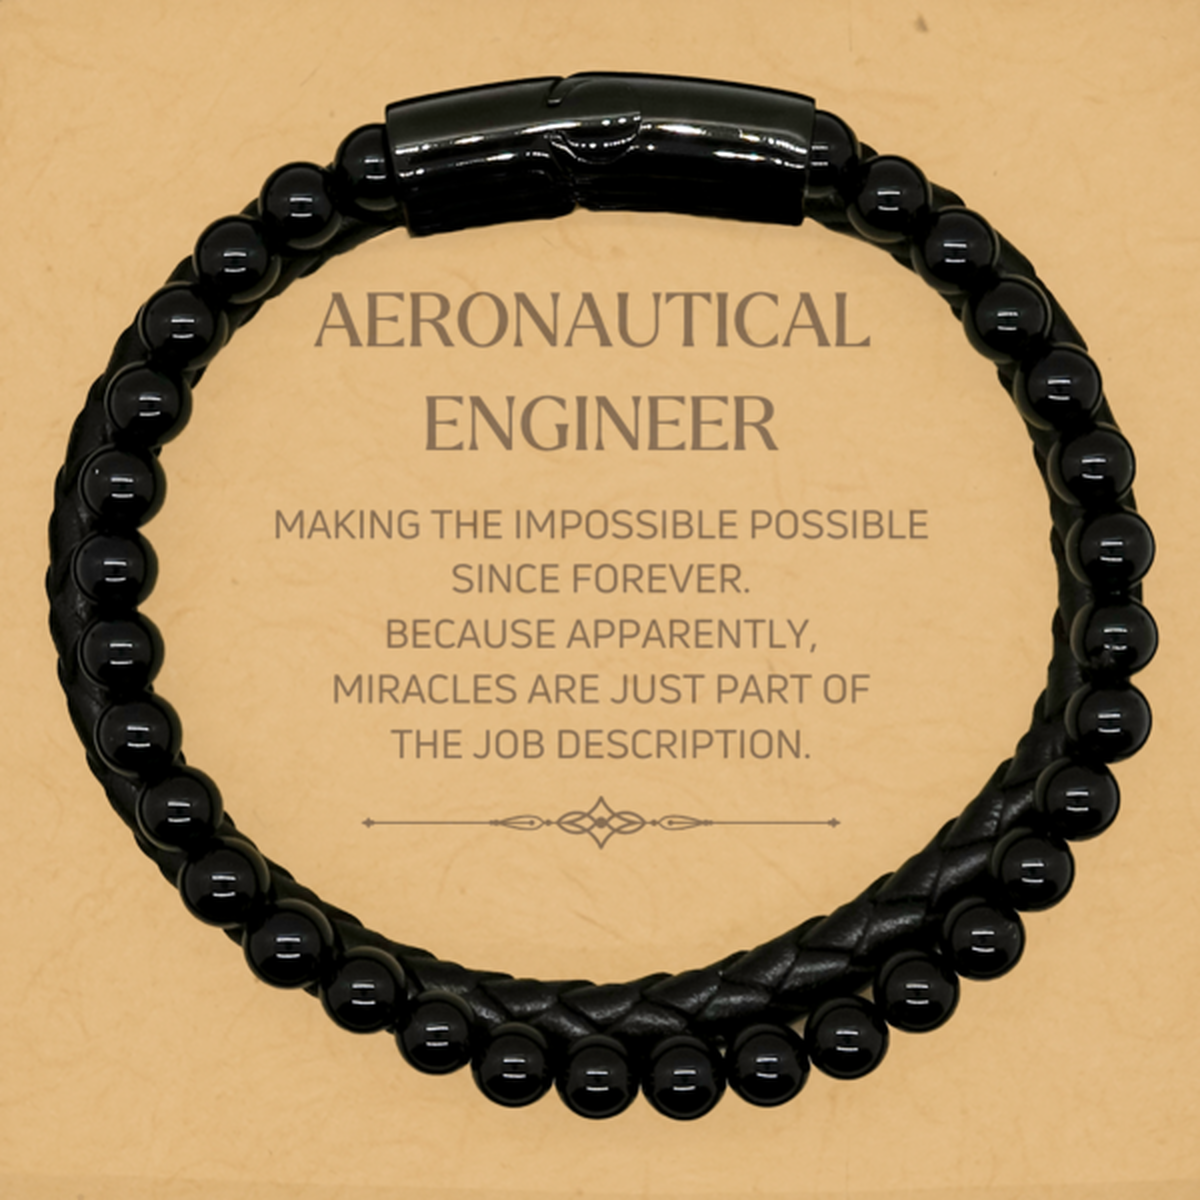 Funny Aeronautical Engineer Gifts, Miracles are just part of the job description, Inspirational Birthday Stone Leather Bracelets For Aeronautical Engineer, Men, Women, Coworkers, Friends, Boss